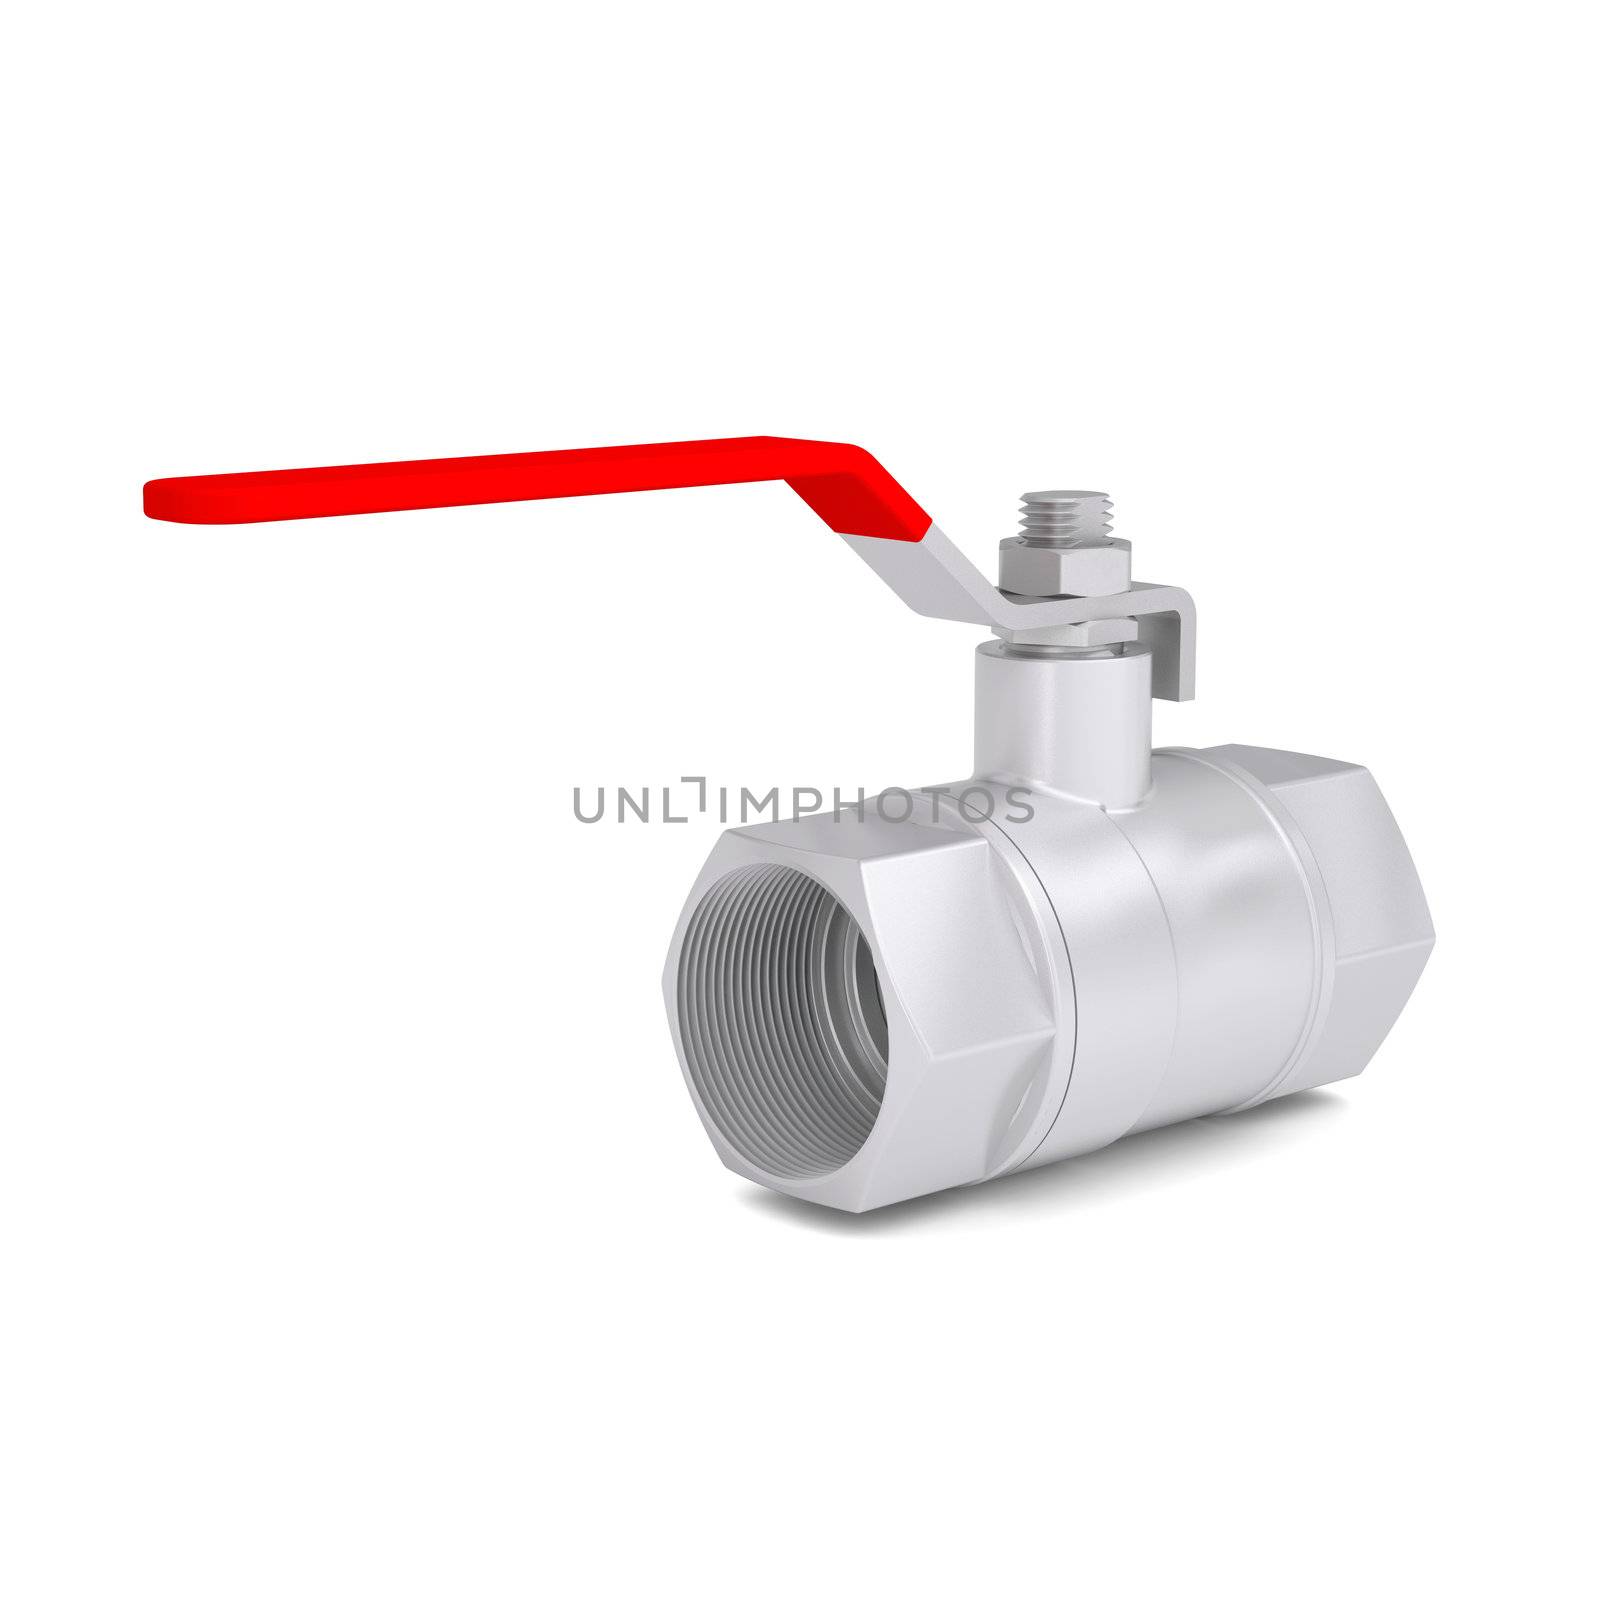 Ball valve. Isolated render on a white background